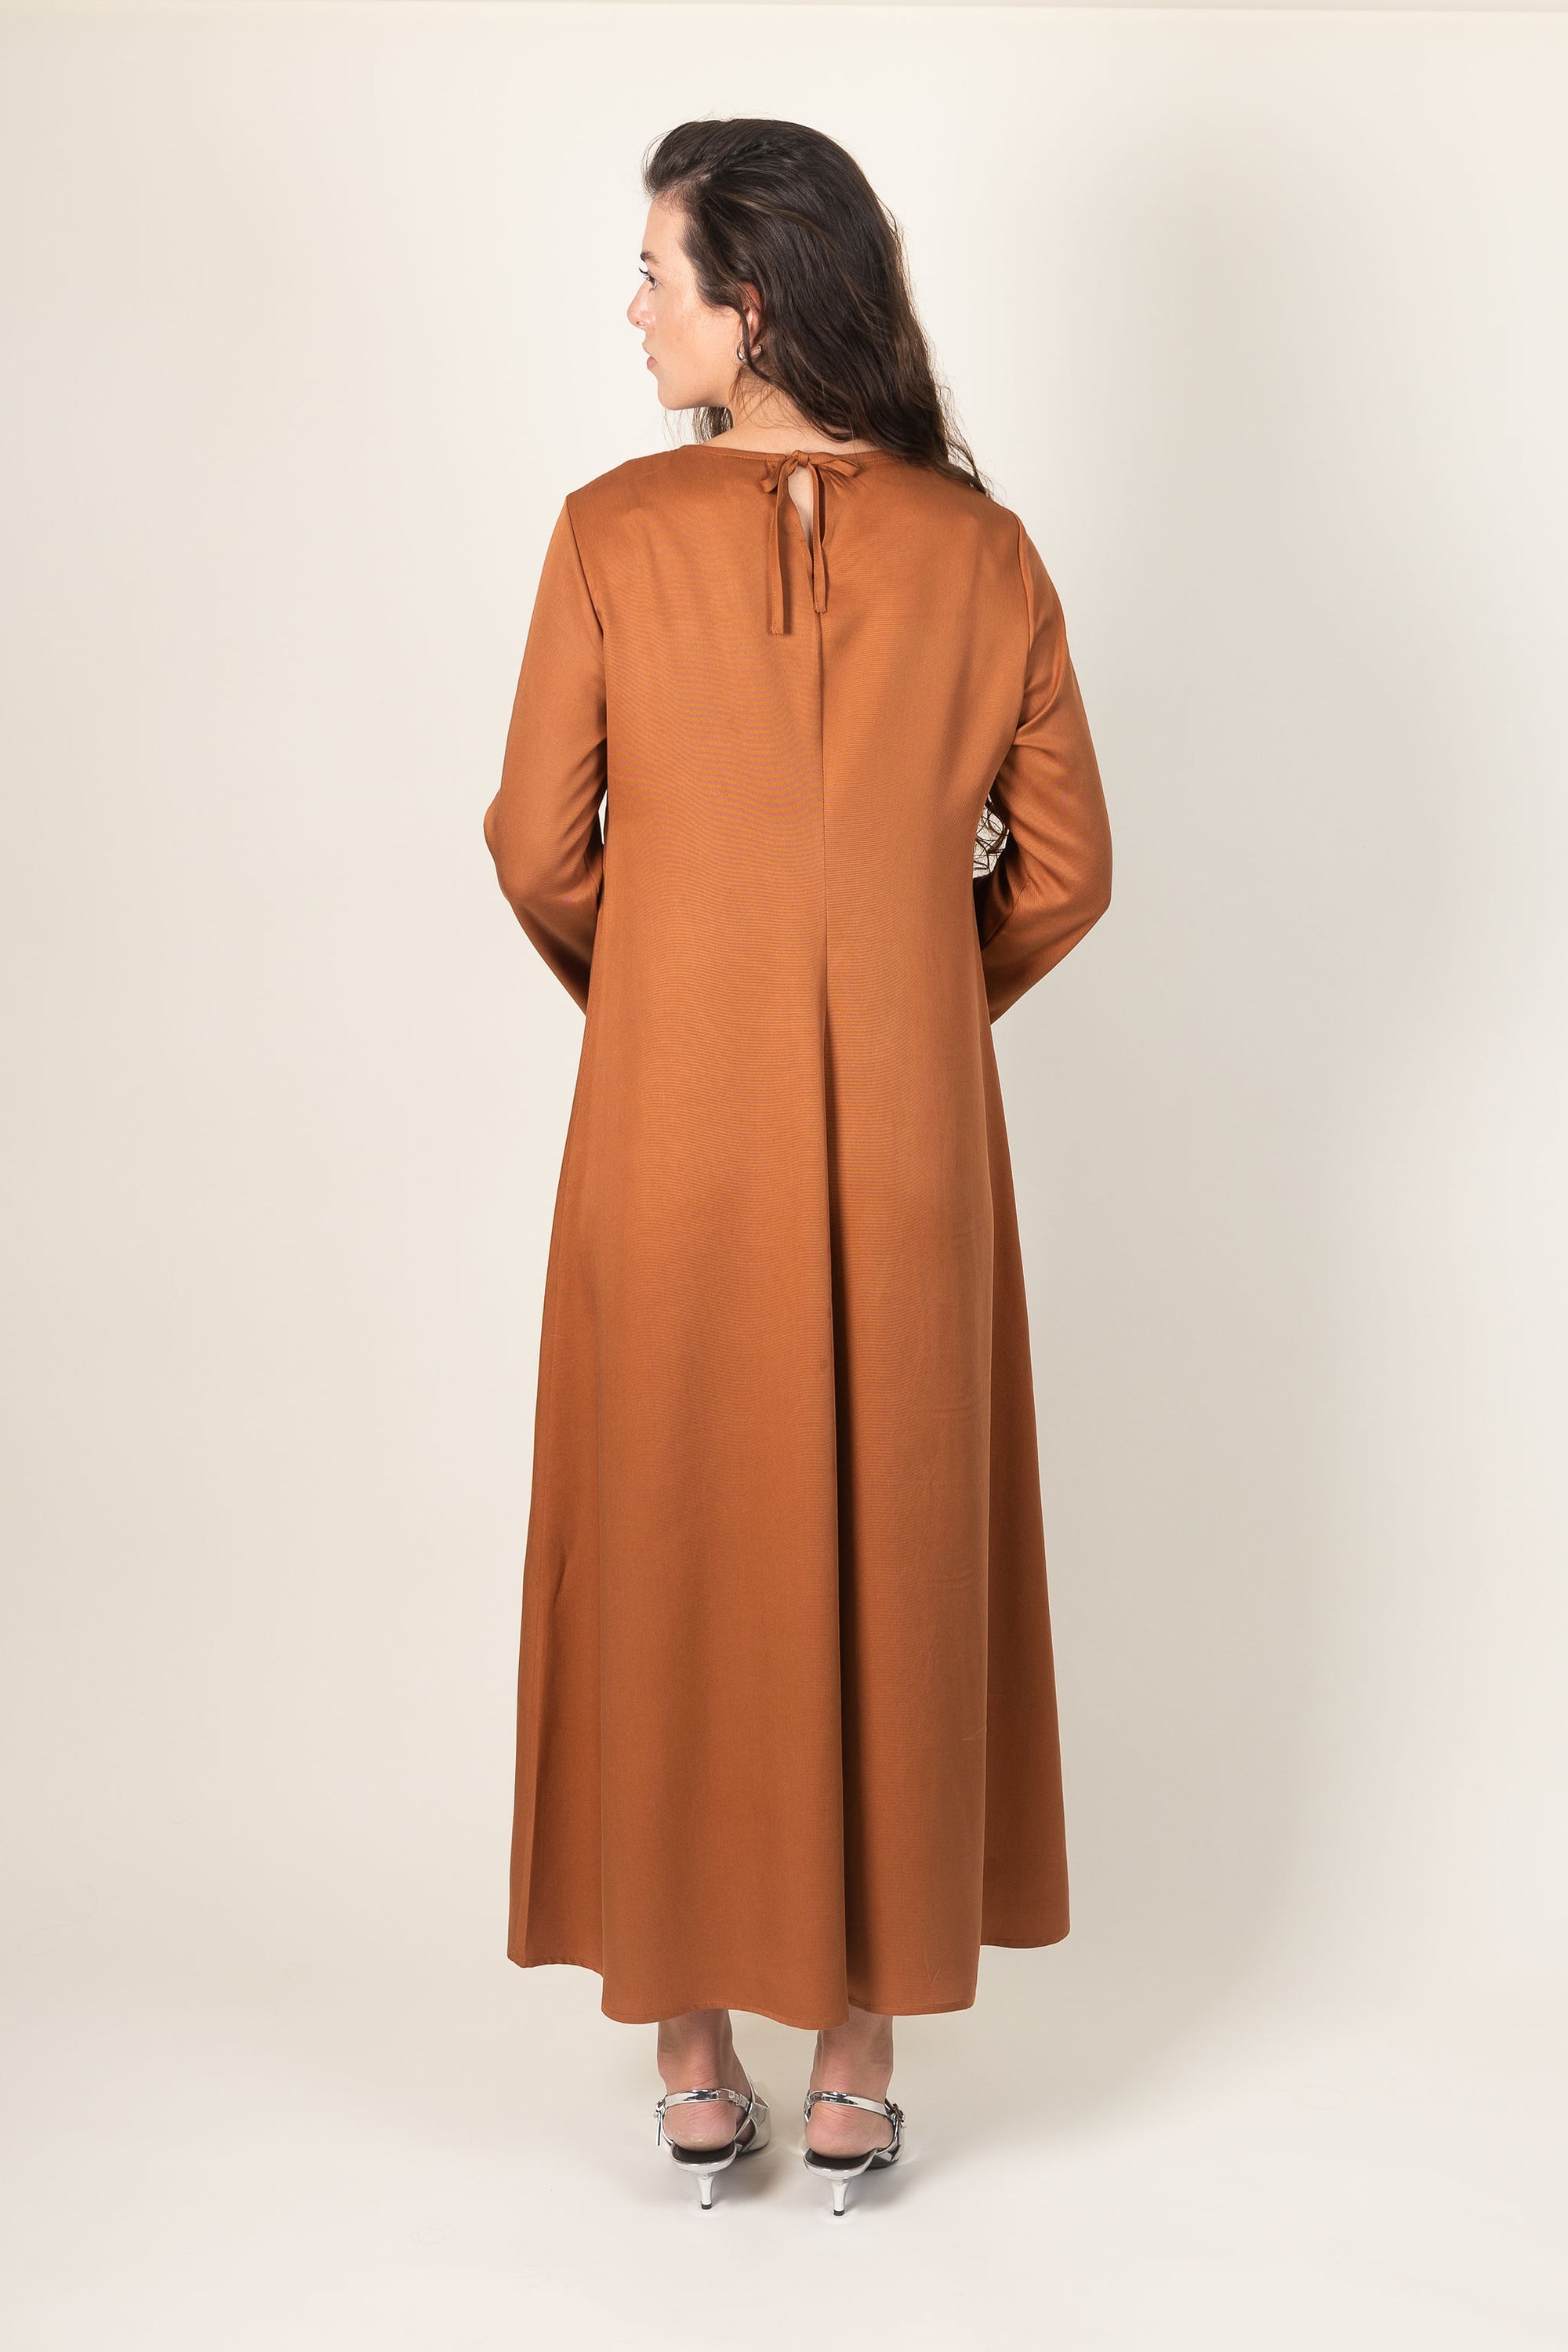 Ames Store Staple Dress in Bronze Winter dress back with heels